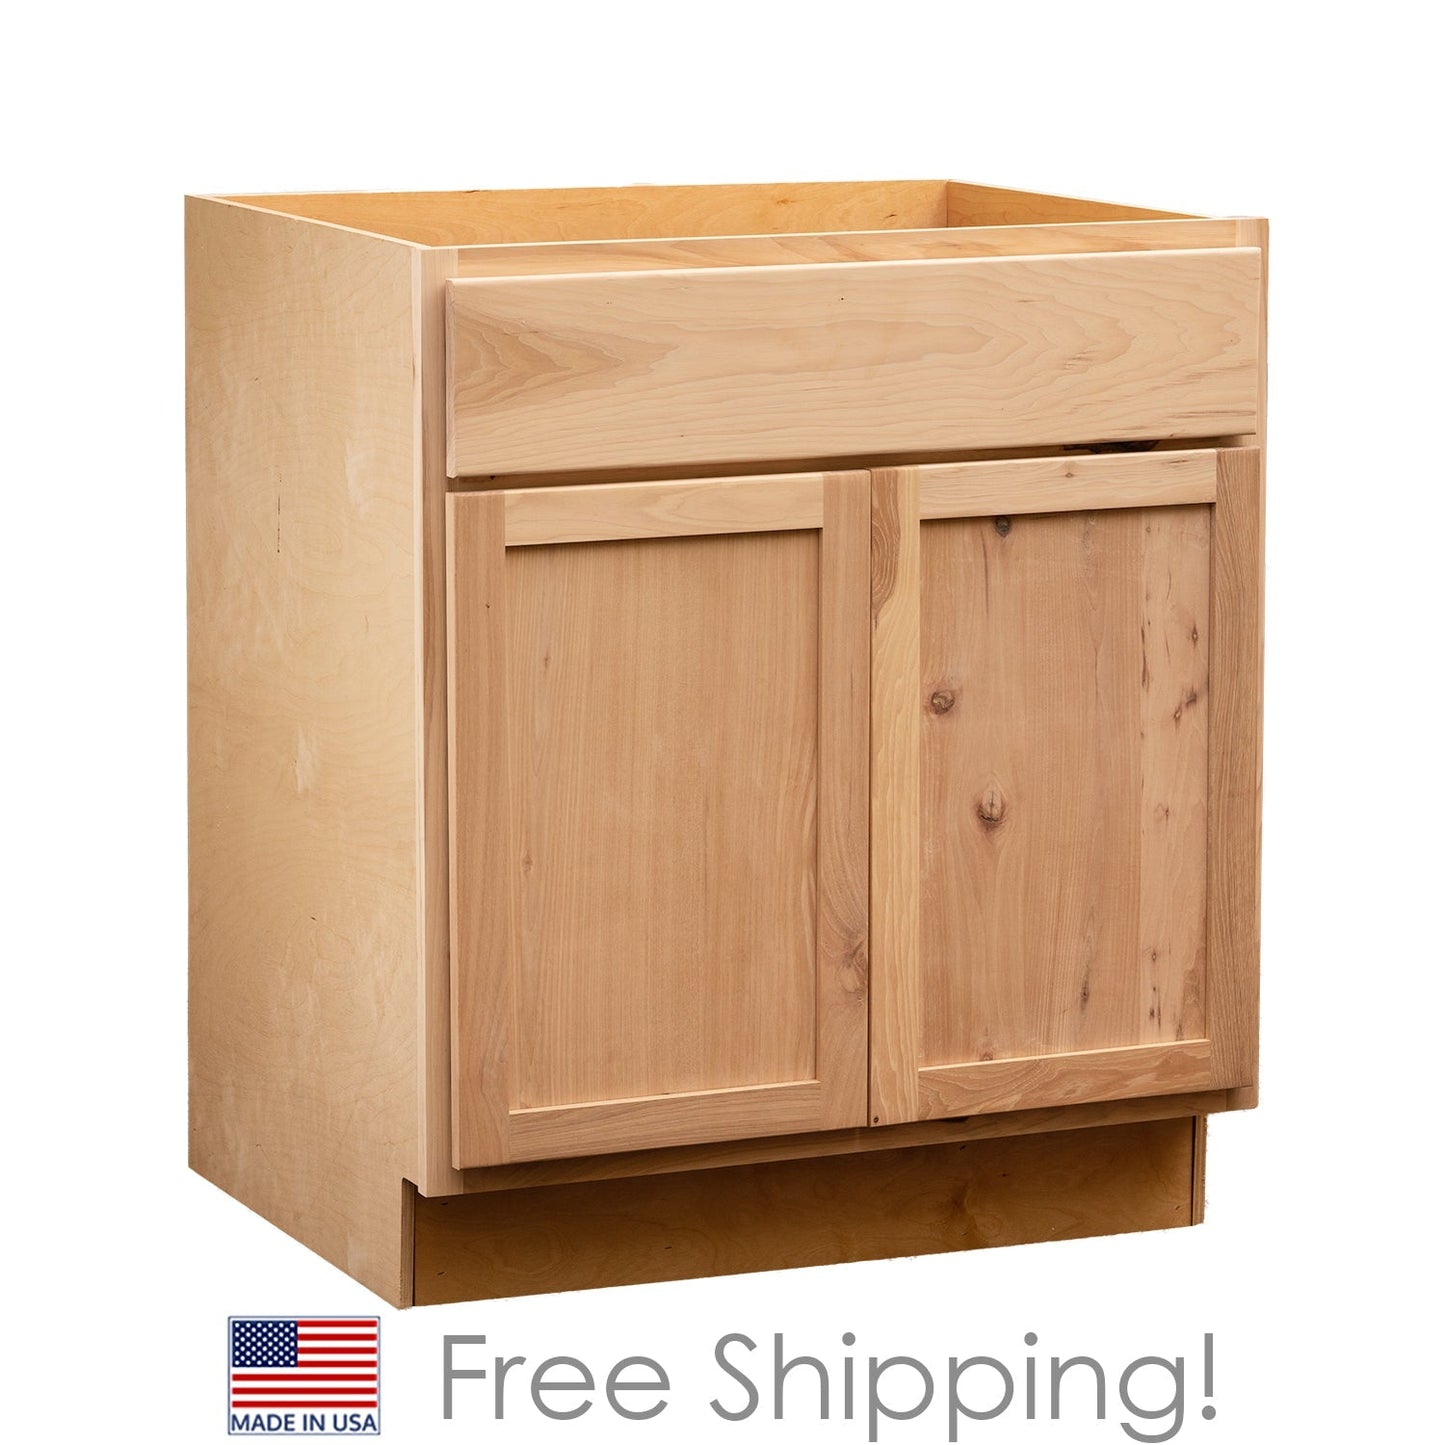 Quicklock RTA (Ready-to-Assemble) Raw Hickory Sink Base Cabinet | 36"Wx34.5"Hx24"D